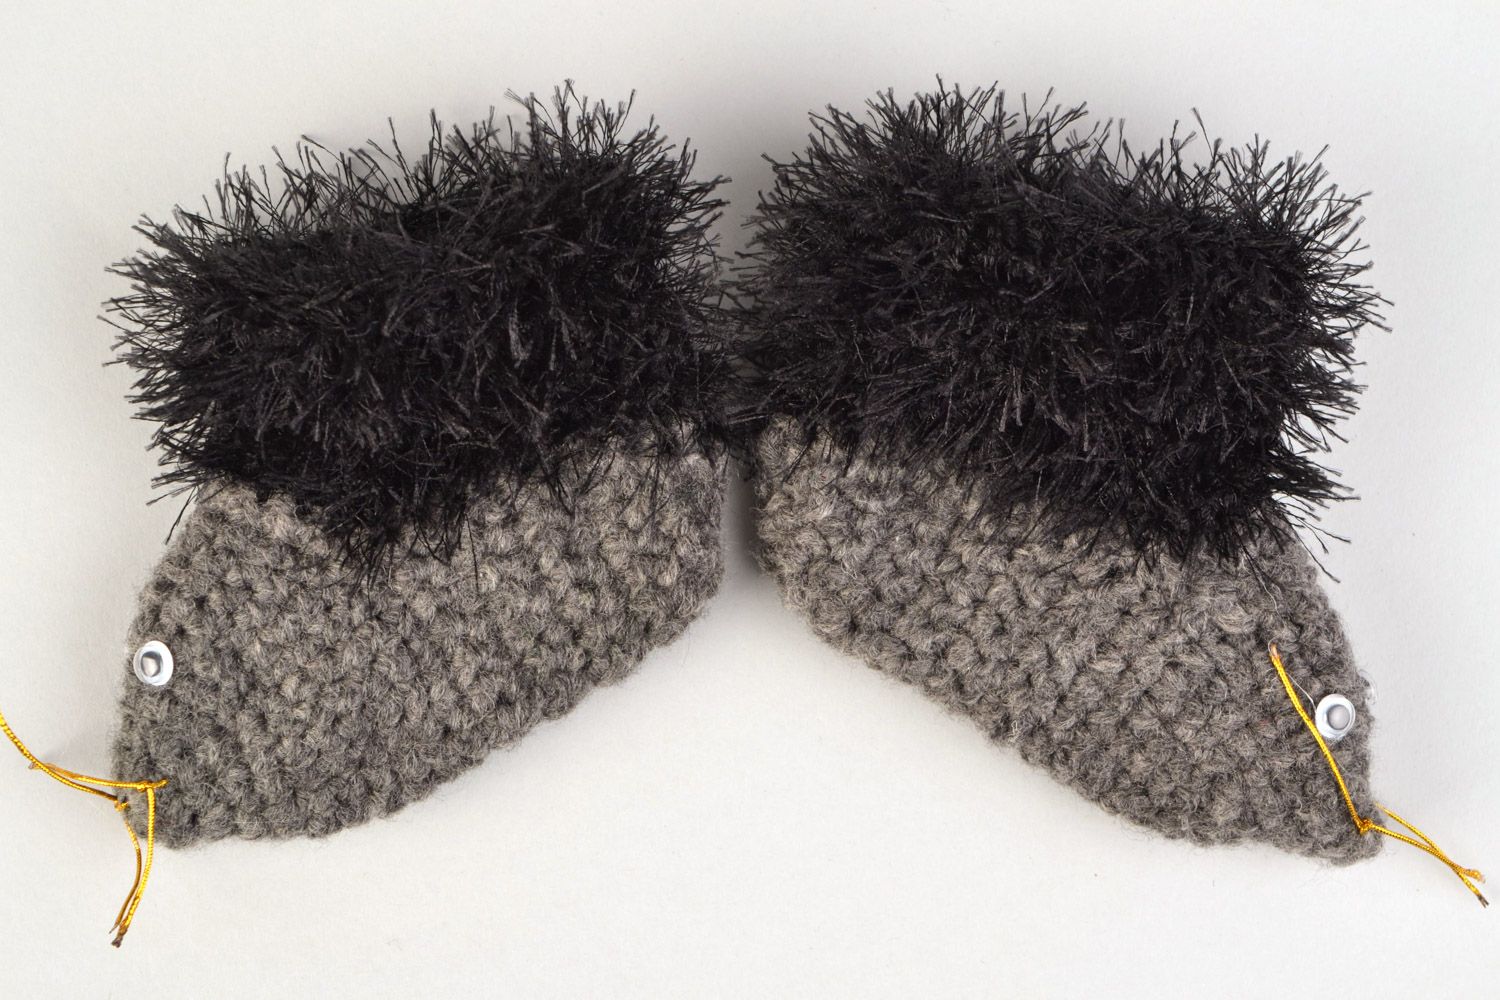 Handmade crochet baby shoes in the shape of gray hedgehogs with black edges photo 3